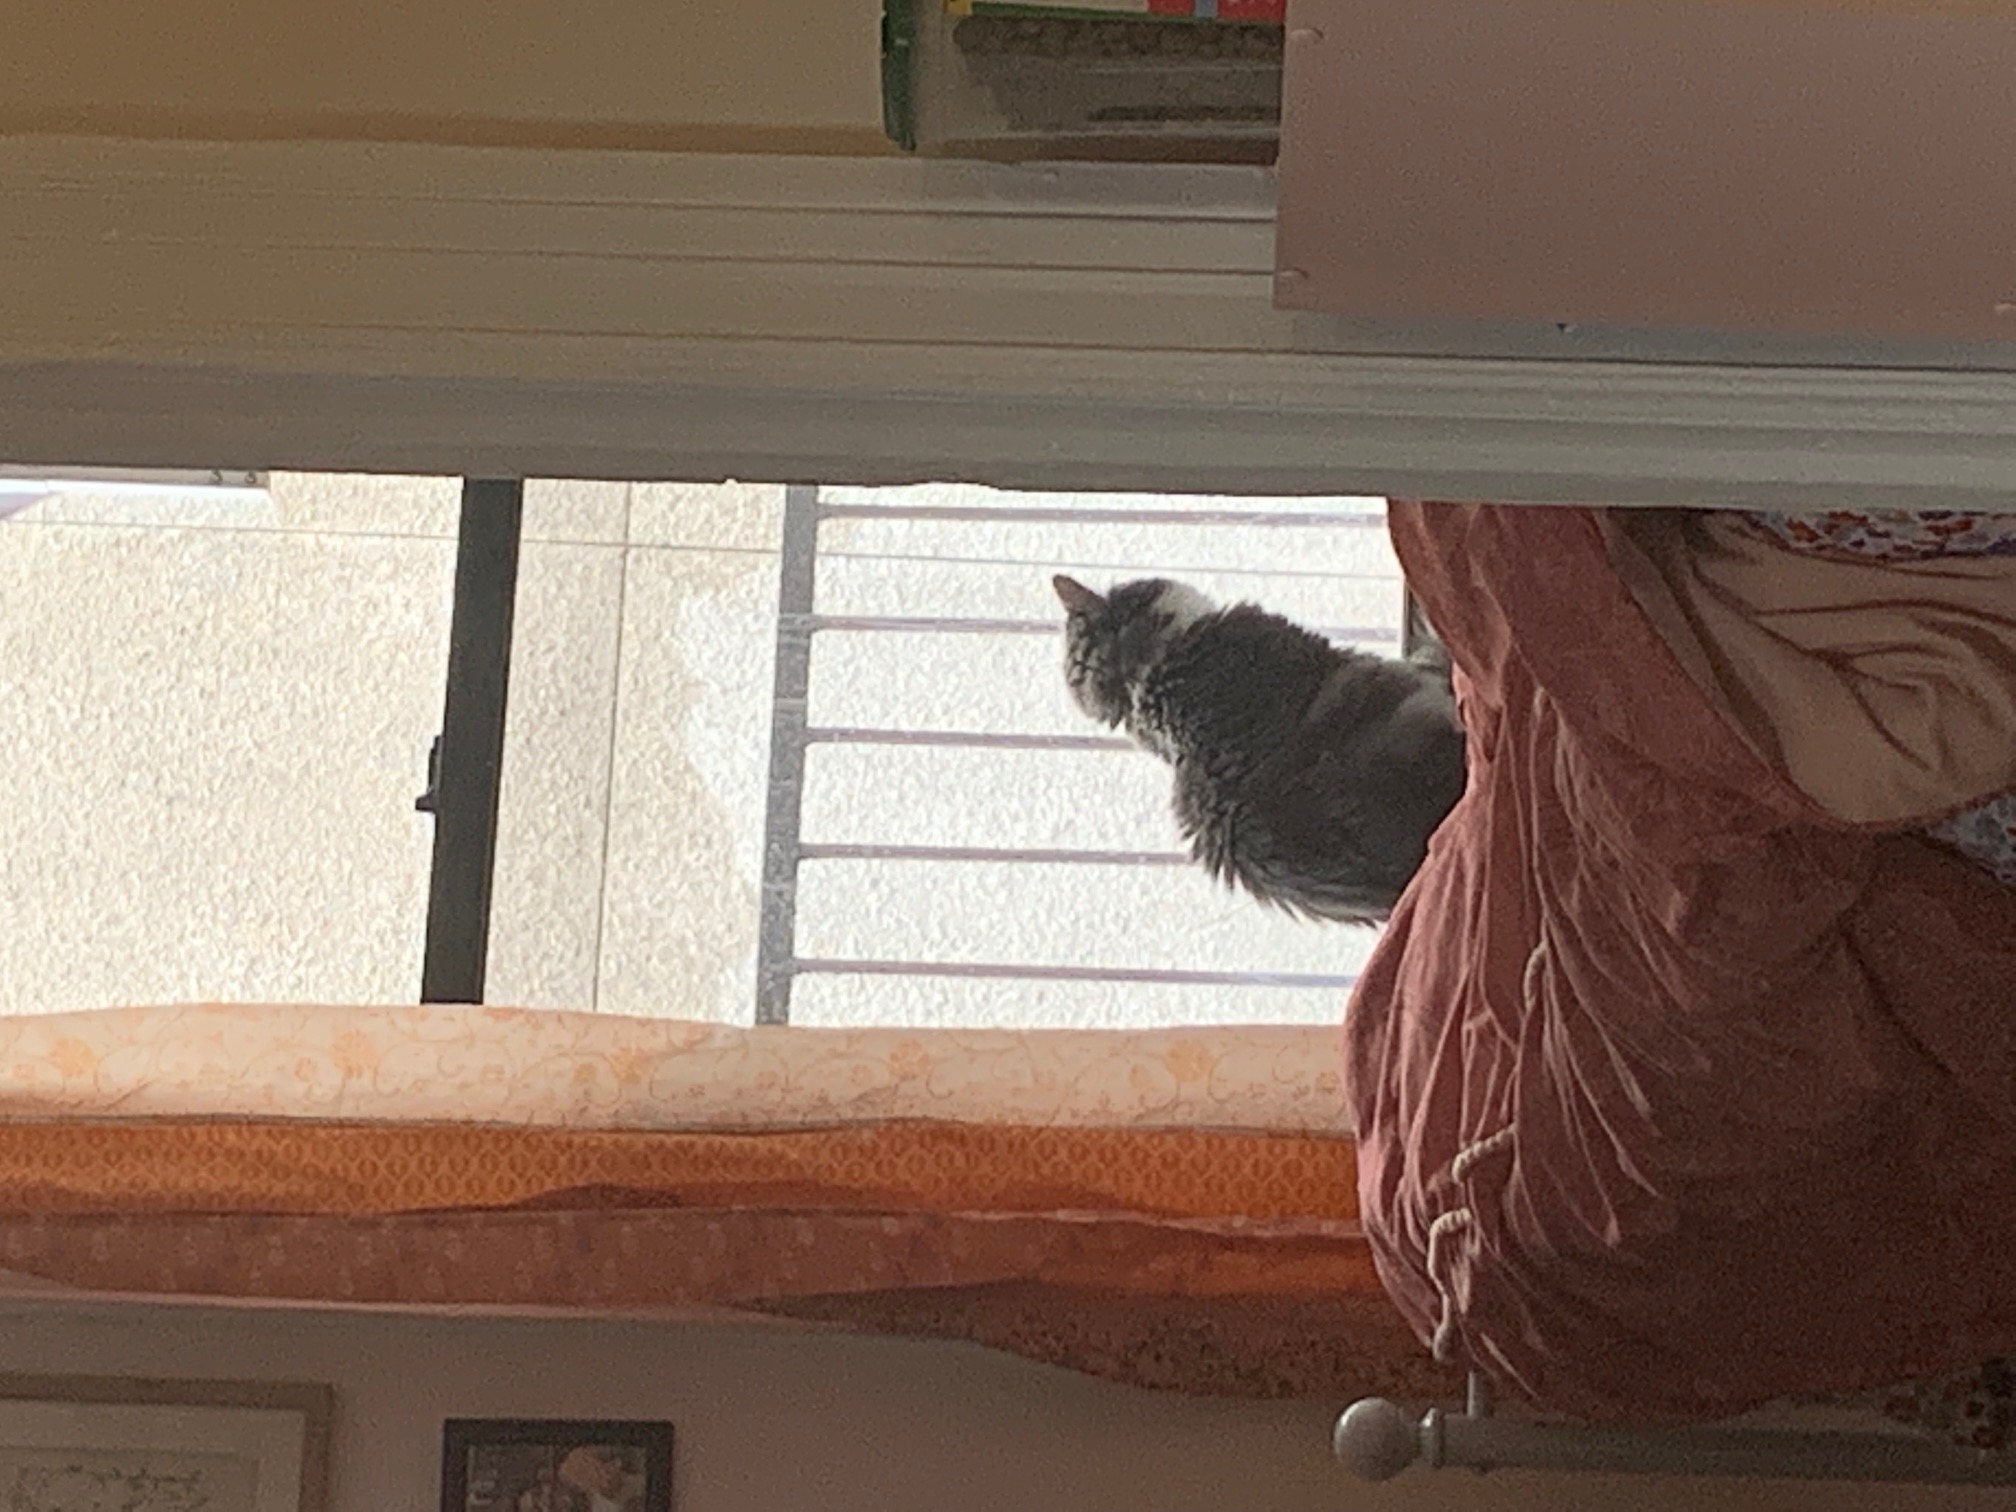 A long-haired gray-and-white cat sitting on a bedroom windowsill with her back to the camera and looking out the window.